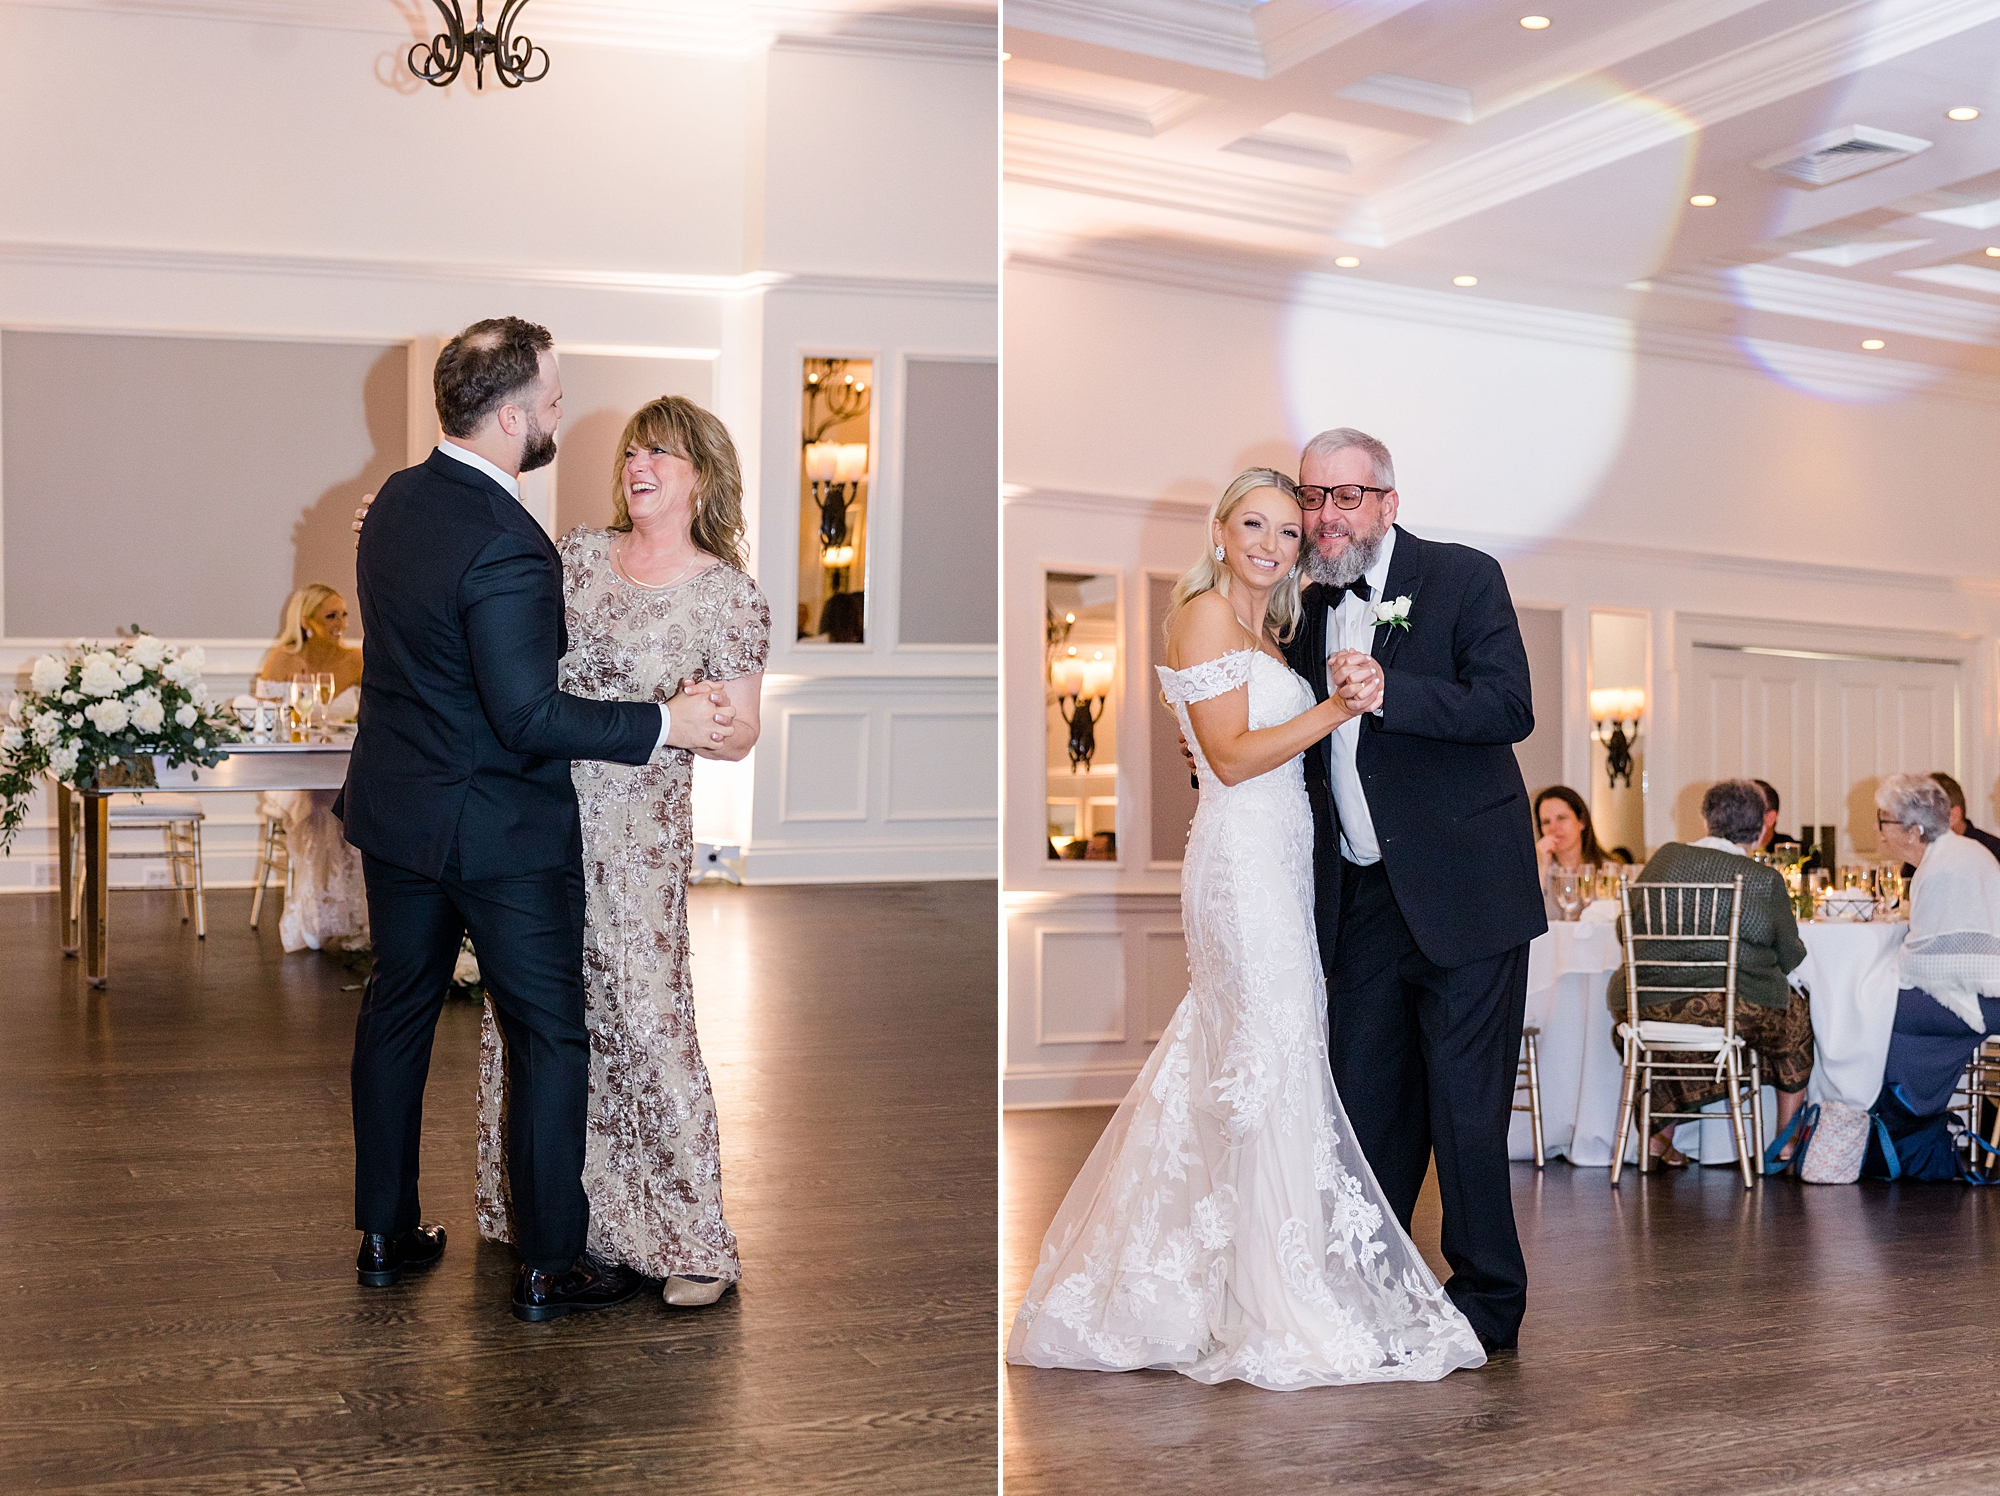 mother-son and father-daughter dance